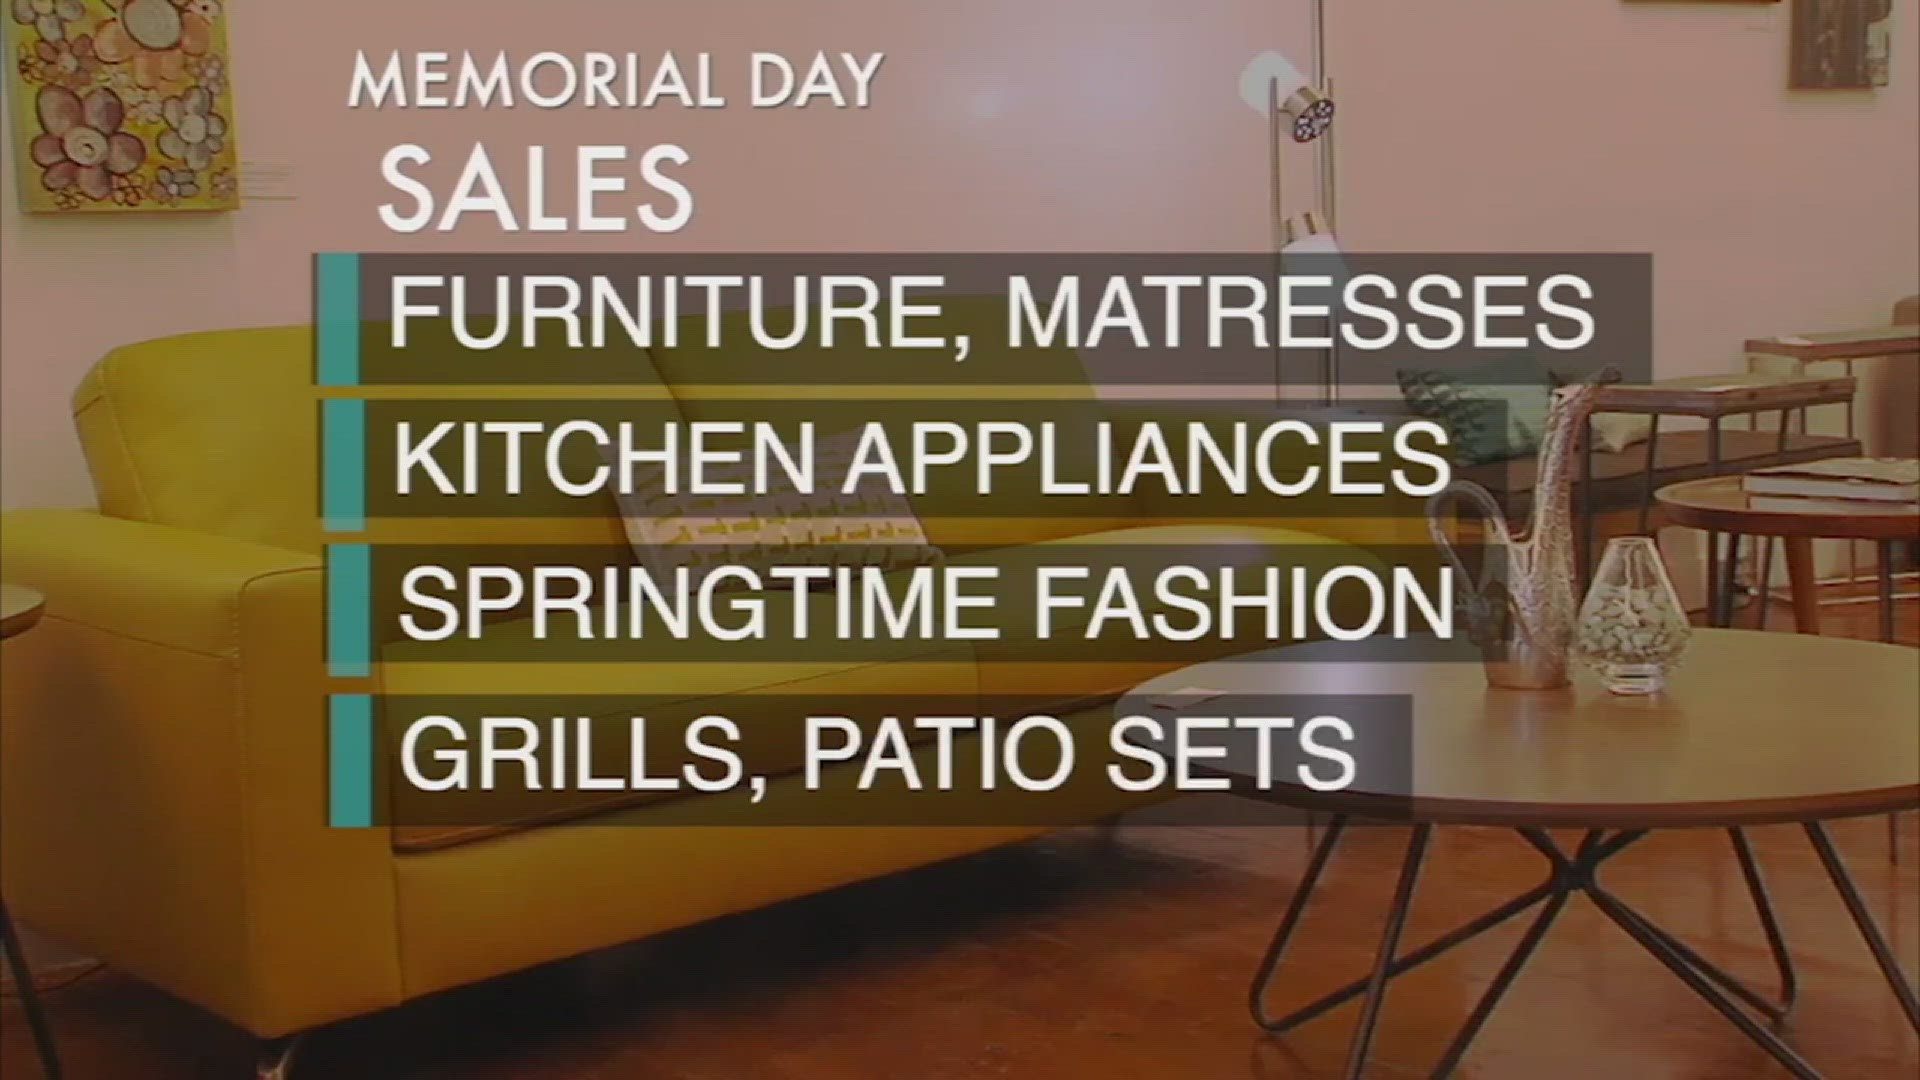 Memorial Day weekend is approaching and you can expect sales at many major retailers. However, many stores are waiting until after the holiday to lower prices.